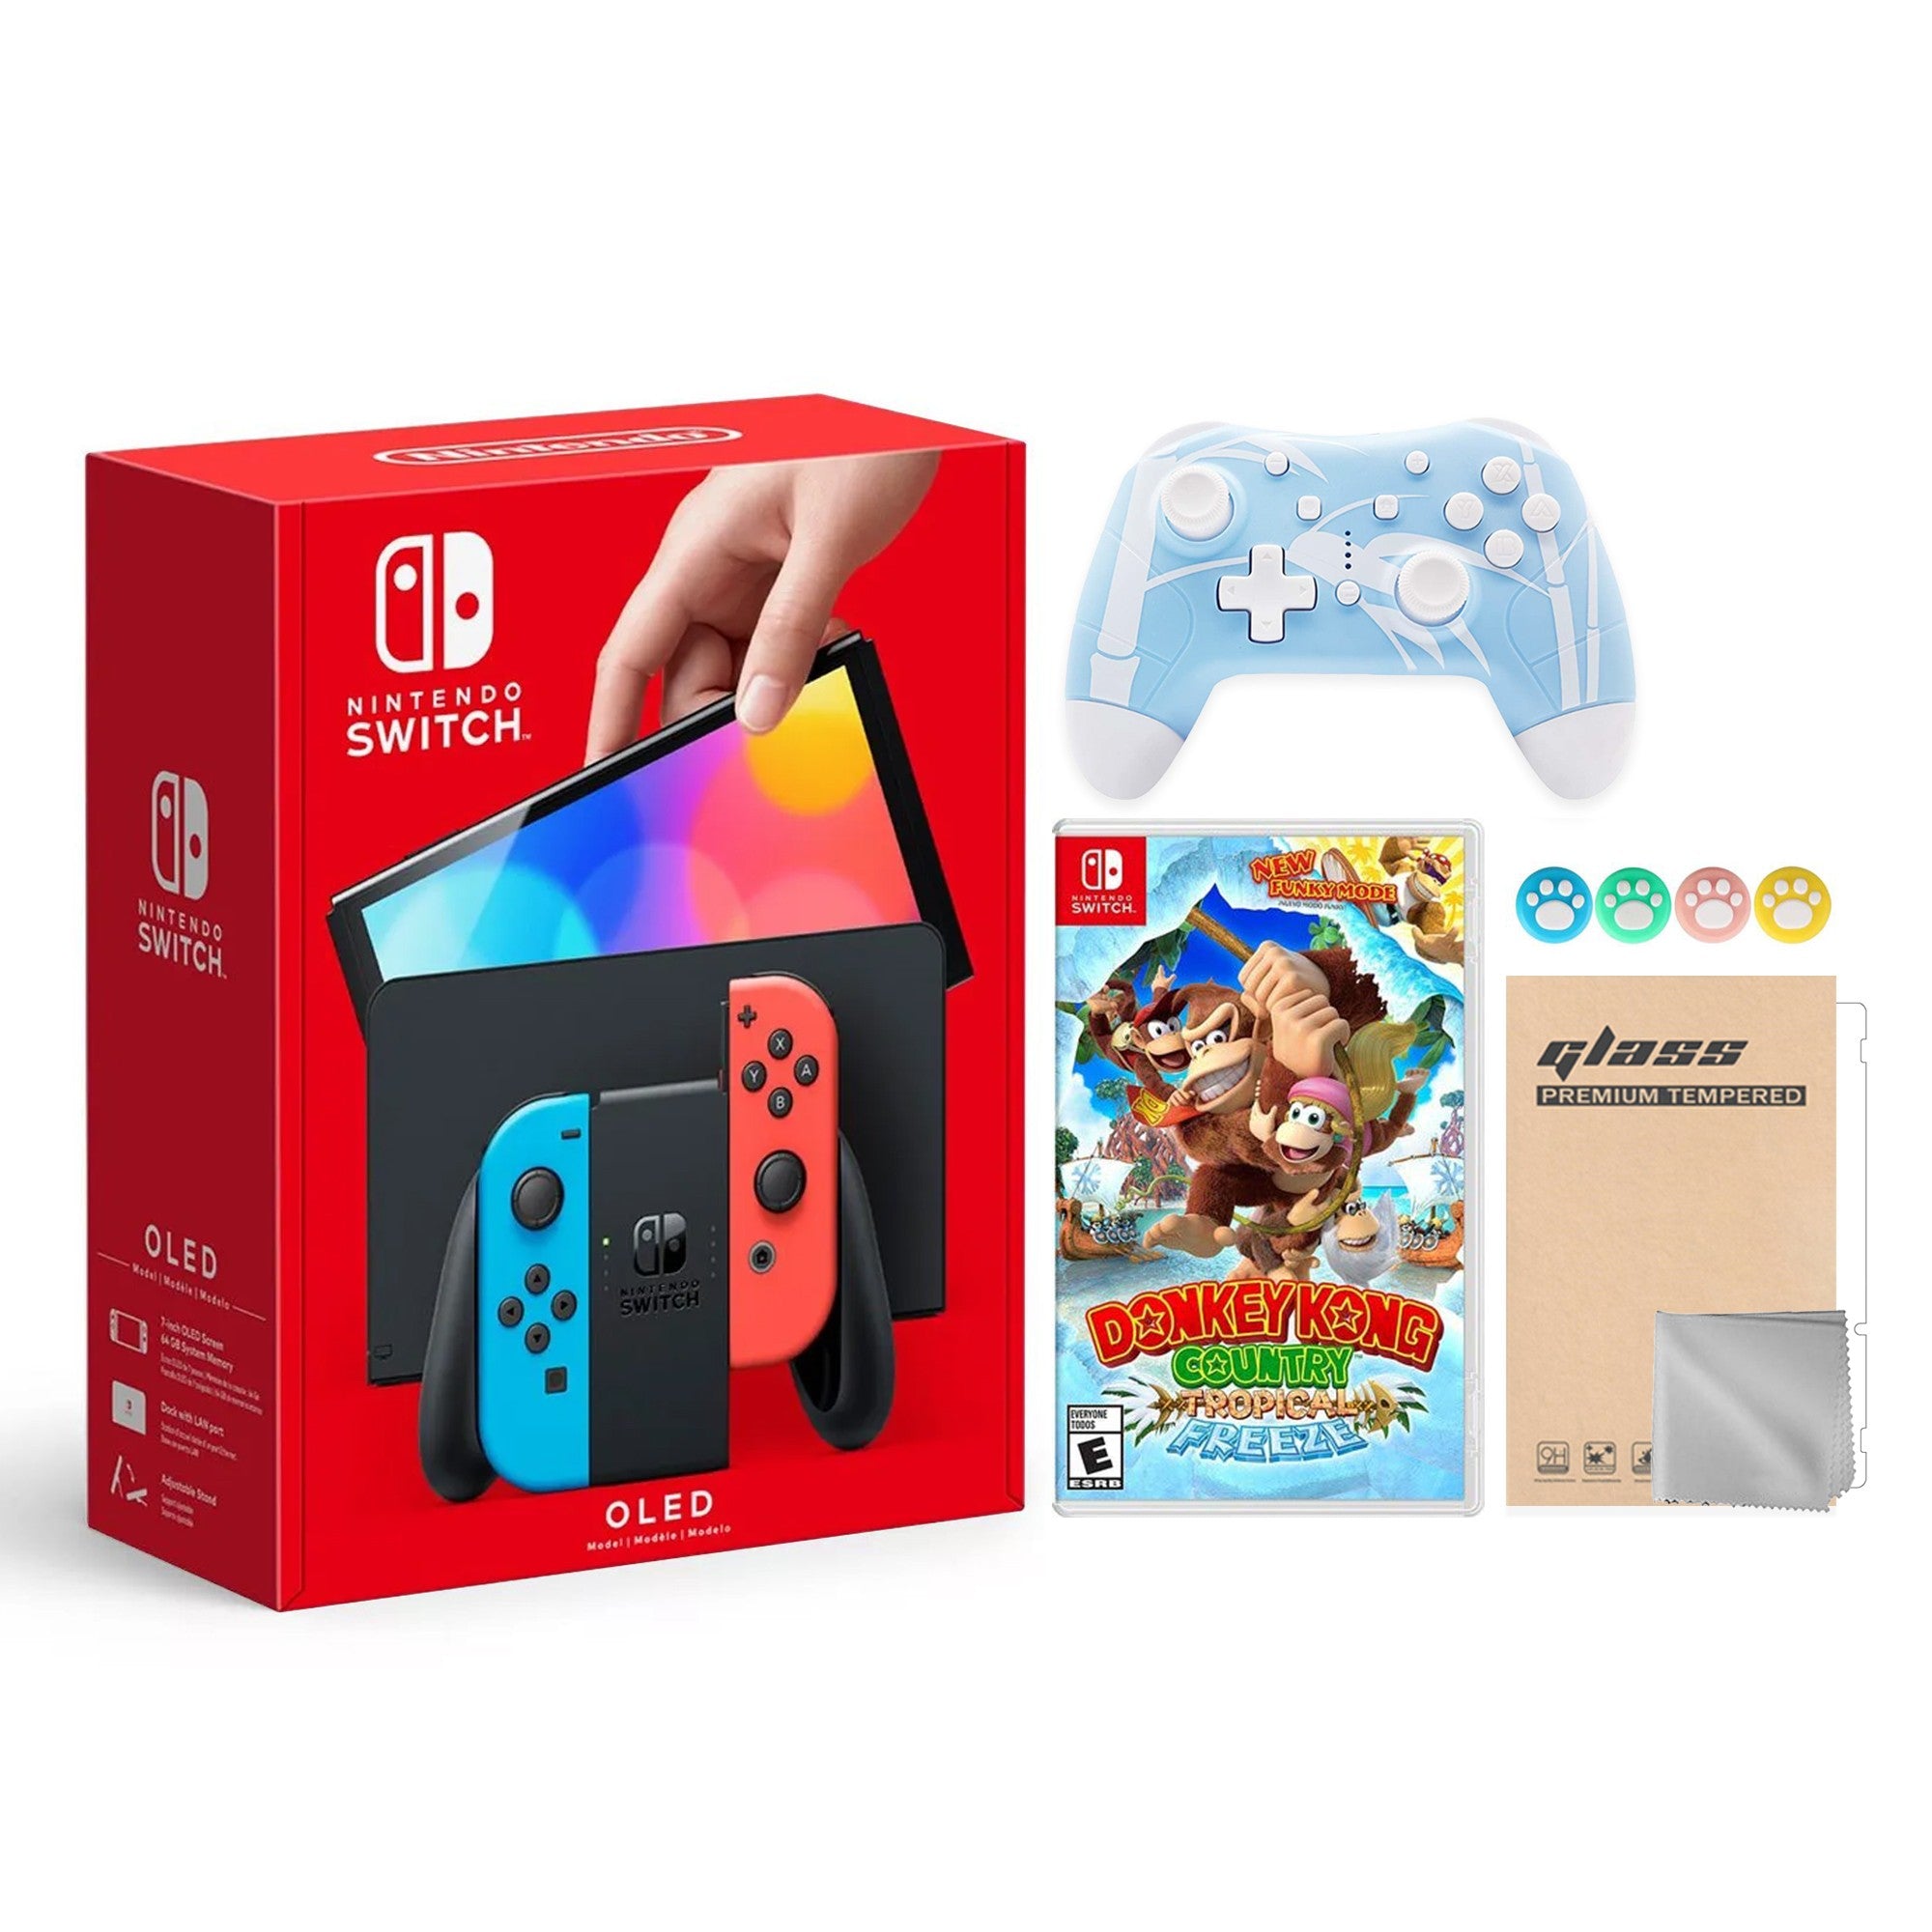 2022 New Nintendo Switch OLED Model Neon Red & Blue Joy Con 64GB Console HD Screen & LAN-Port Dock with Donkey Kong Country, Mytrix Wireless Pro Controller and Accessories